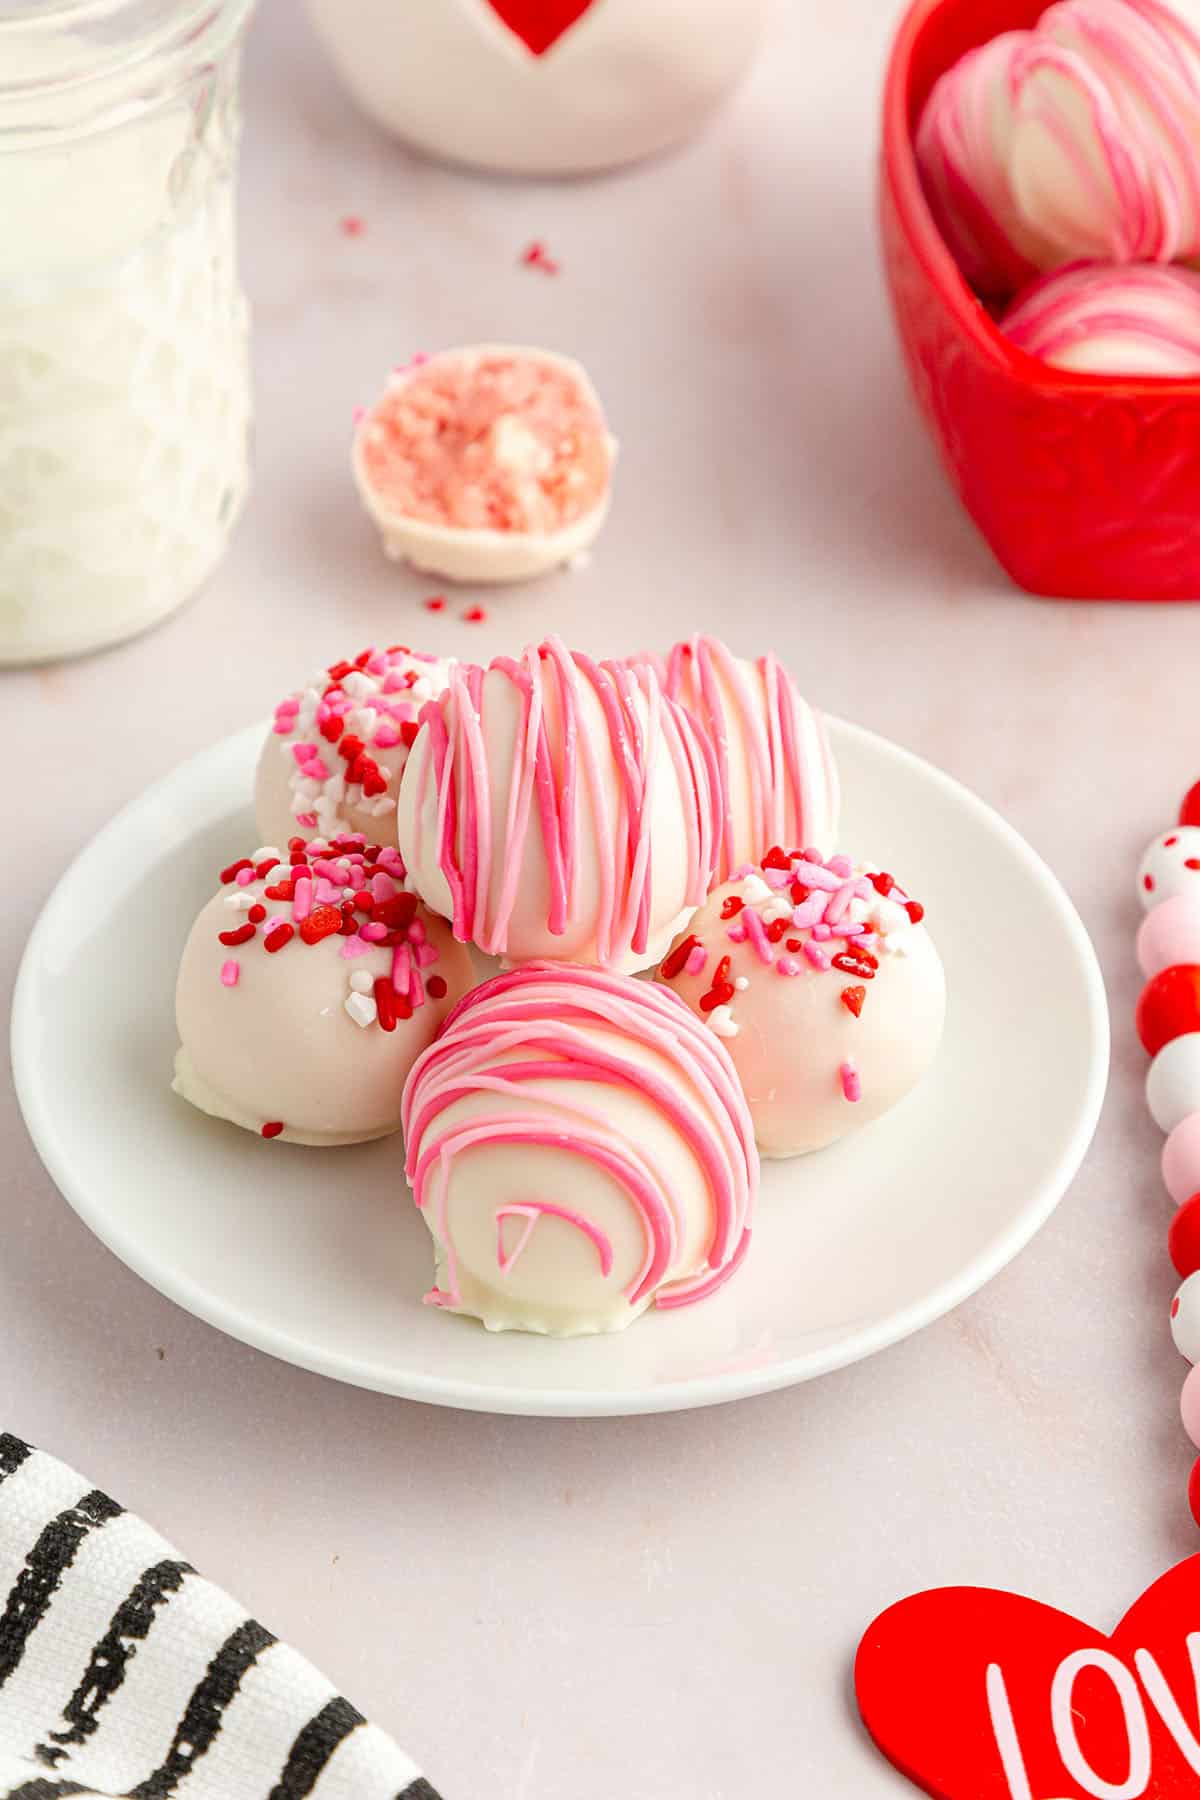 Strawberry cheesecake balls wonderfully decorated in pink and red color candies